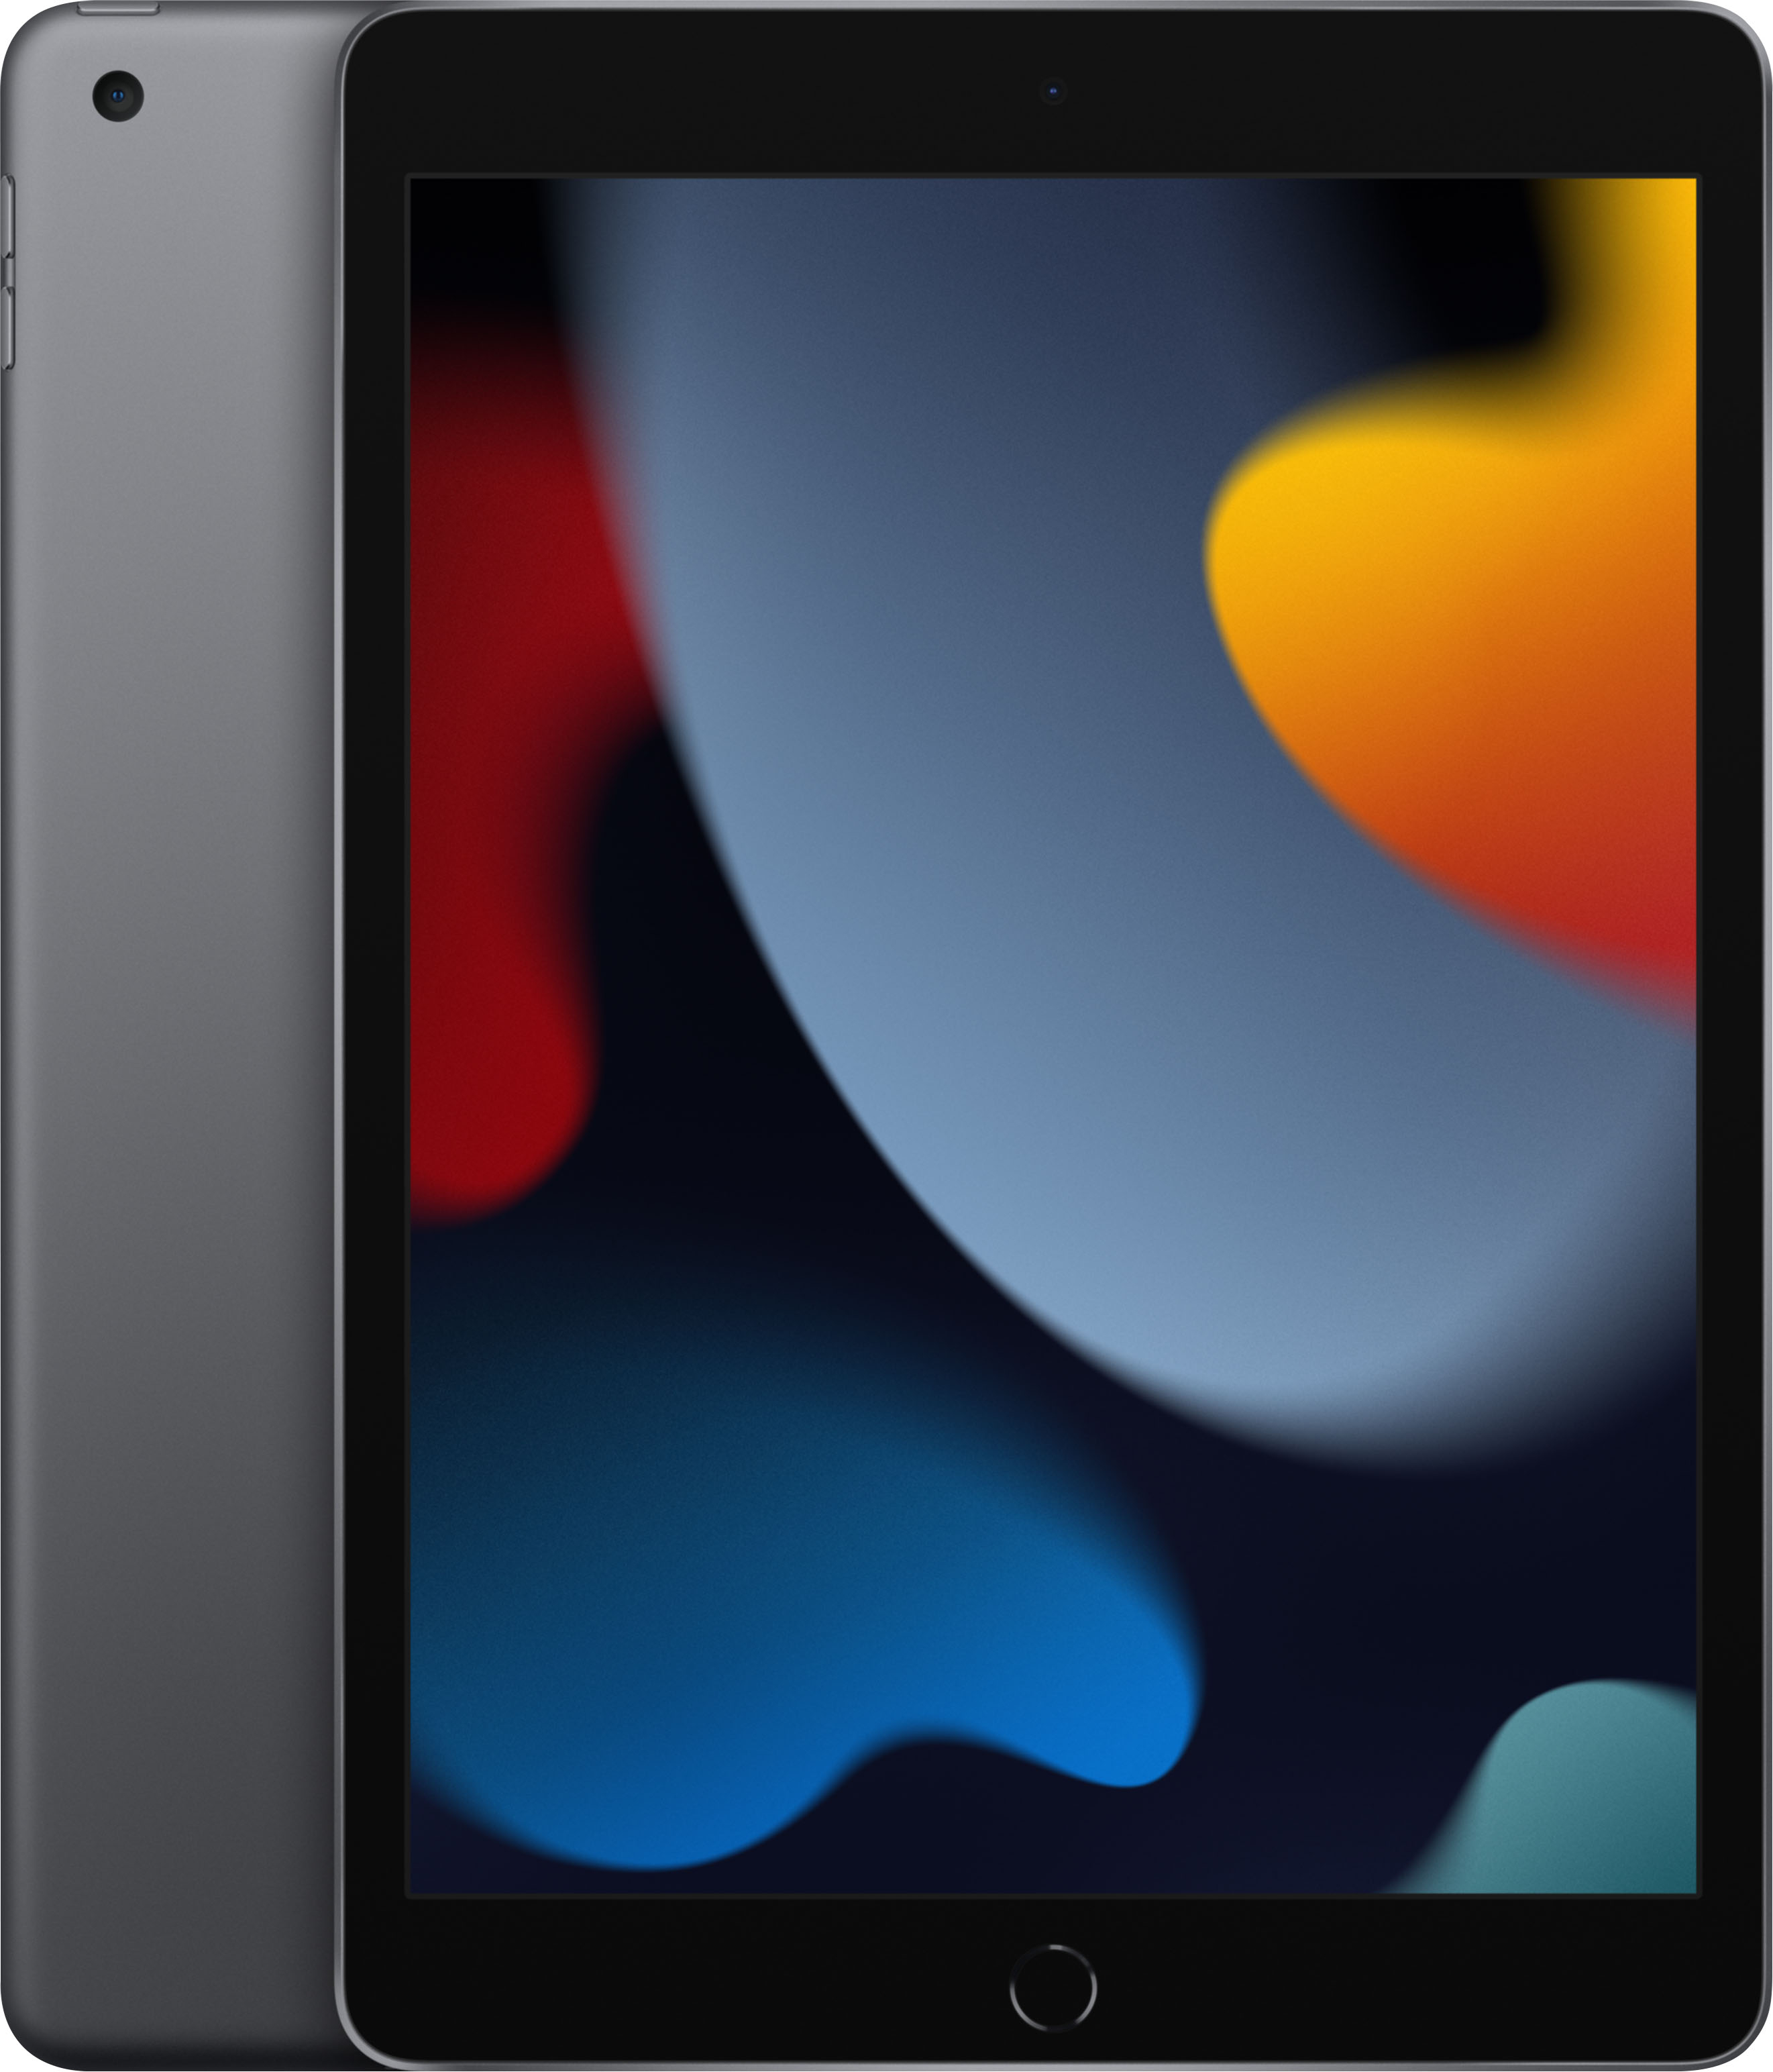 Apple - 10.2-Inch iPad (9th Generation) with Wi-Fi - 64GB Space Gray or Silver $249.99 @ Best Buy